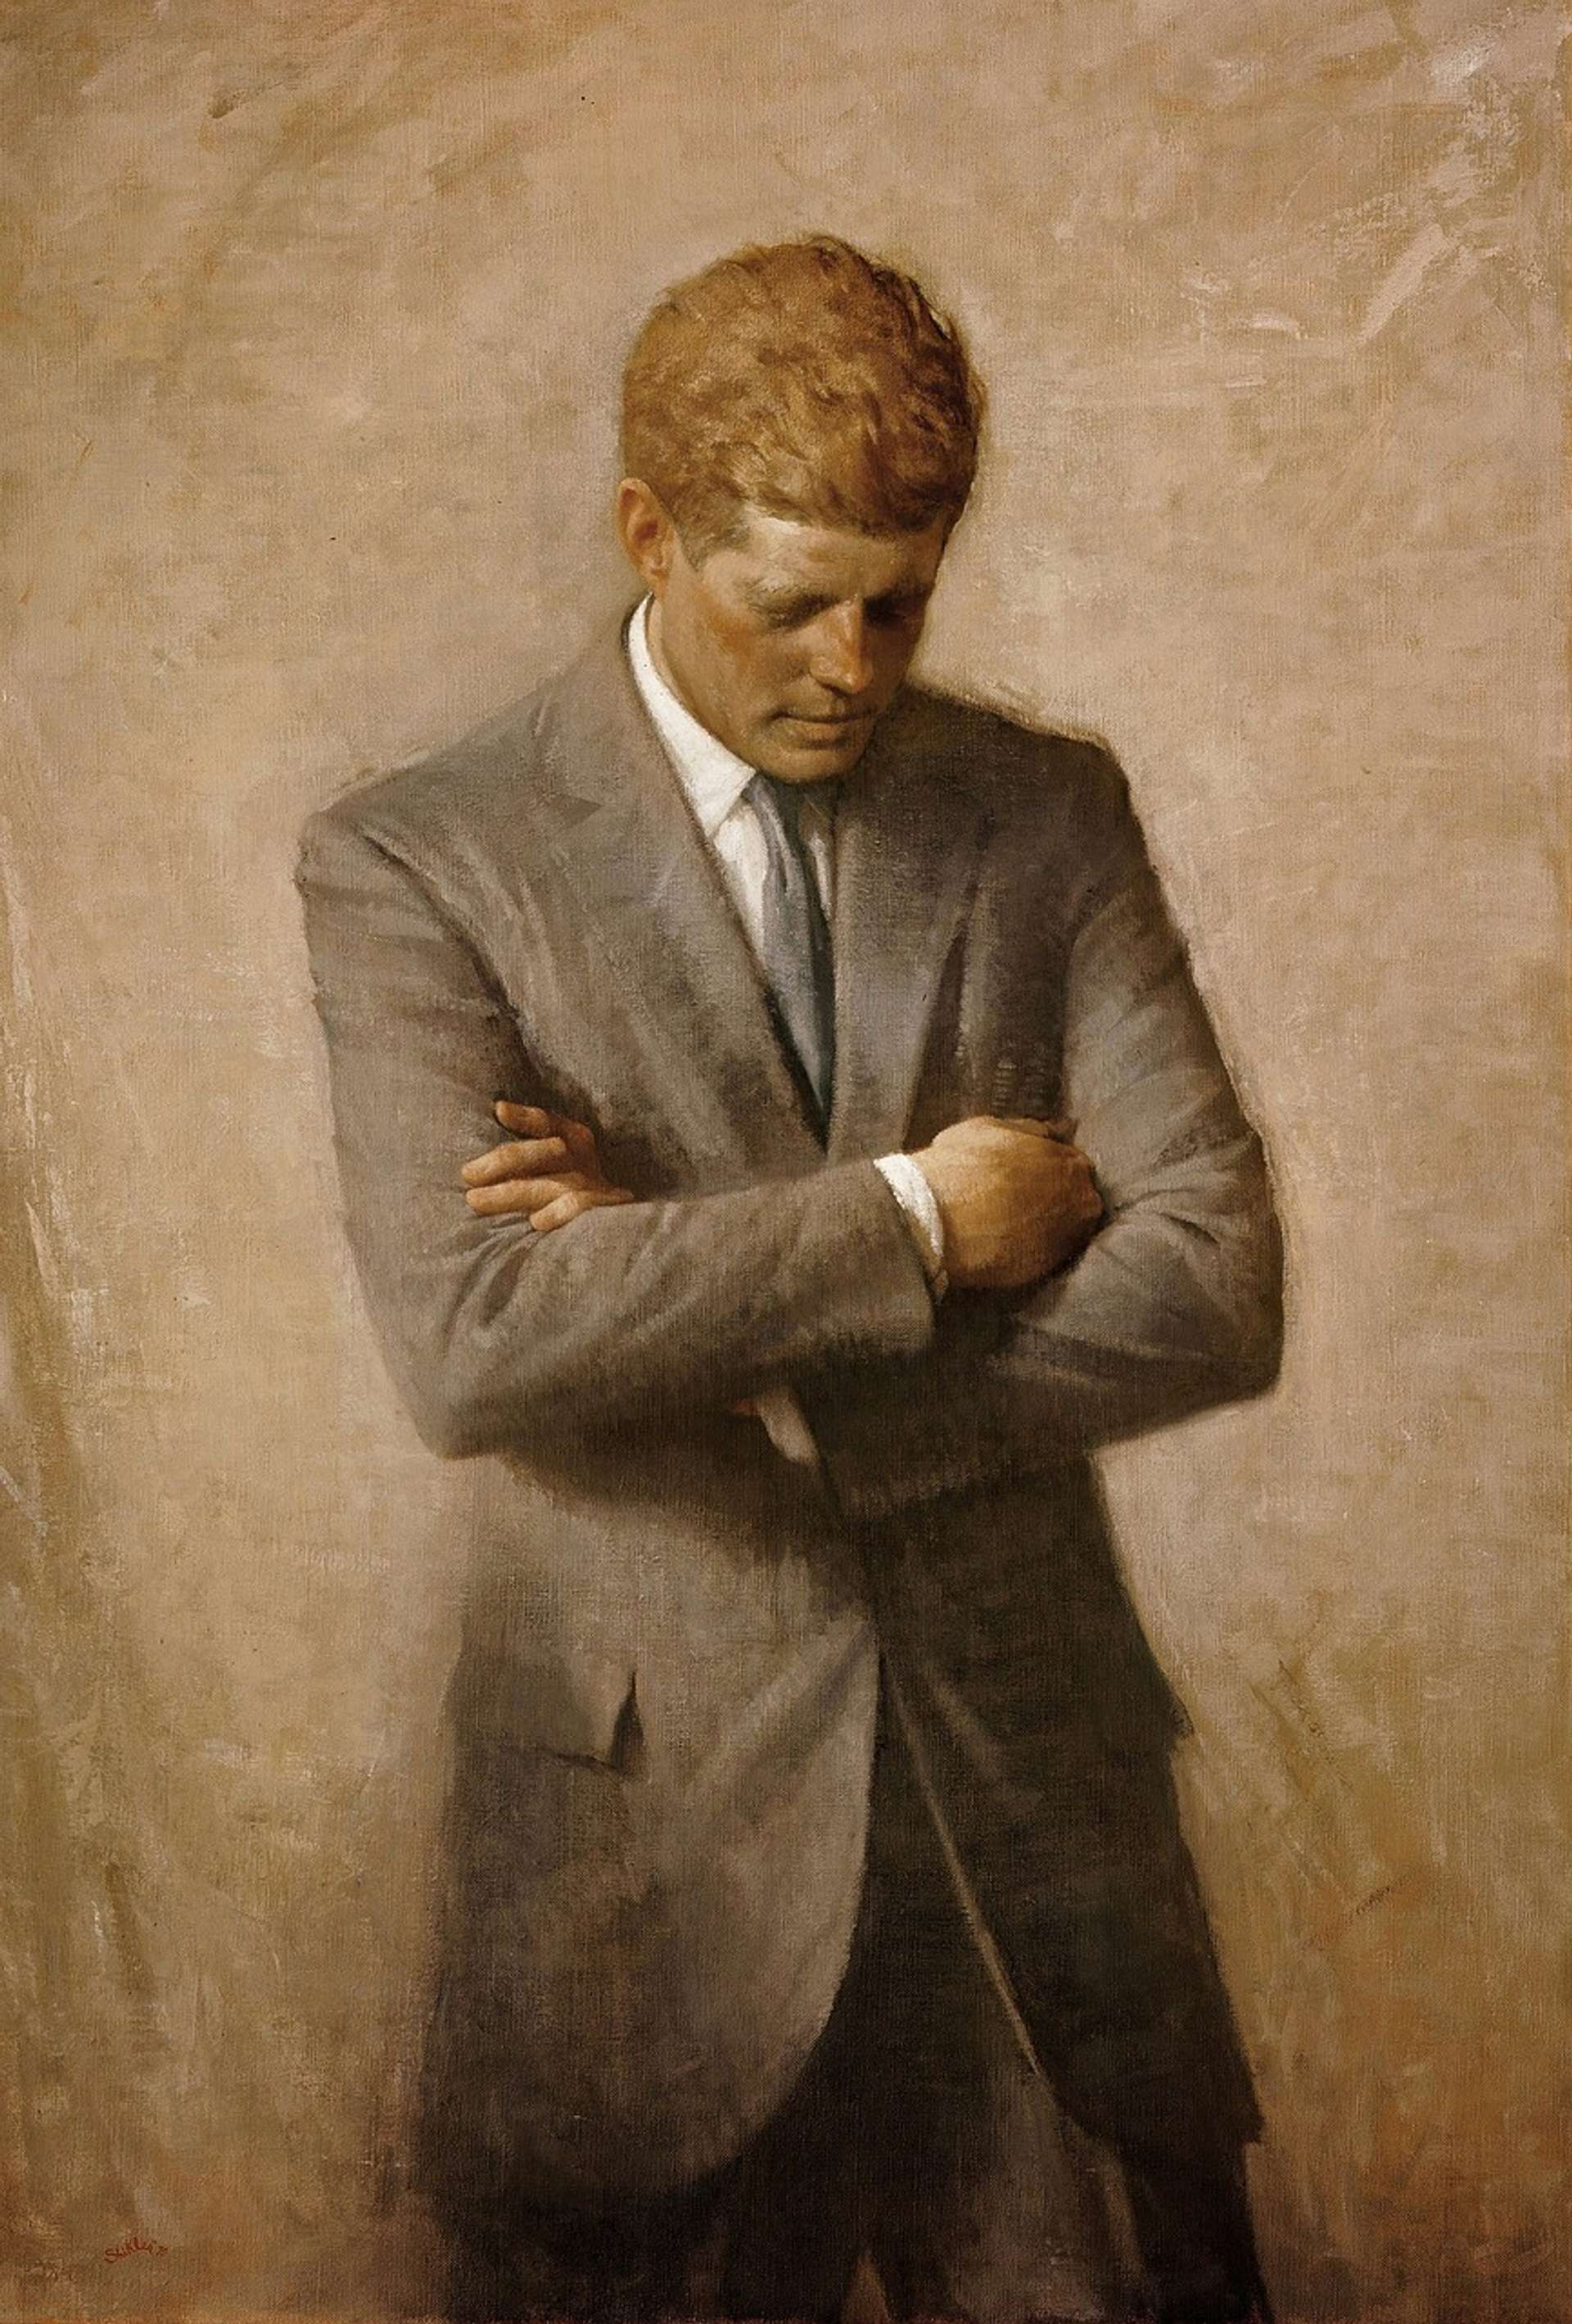 A portrait by Aaron Shikler of President John F. Kennedy standing with his head down, and arms folded. He is wearing a grey suit against a tan background.